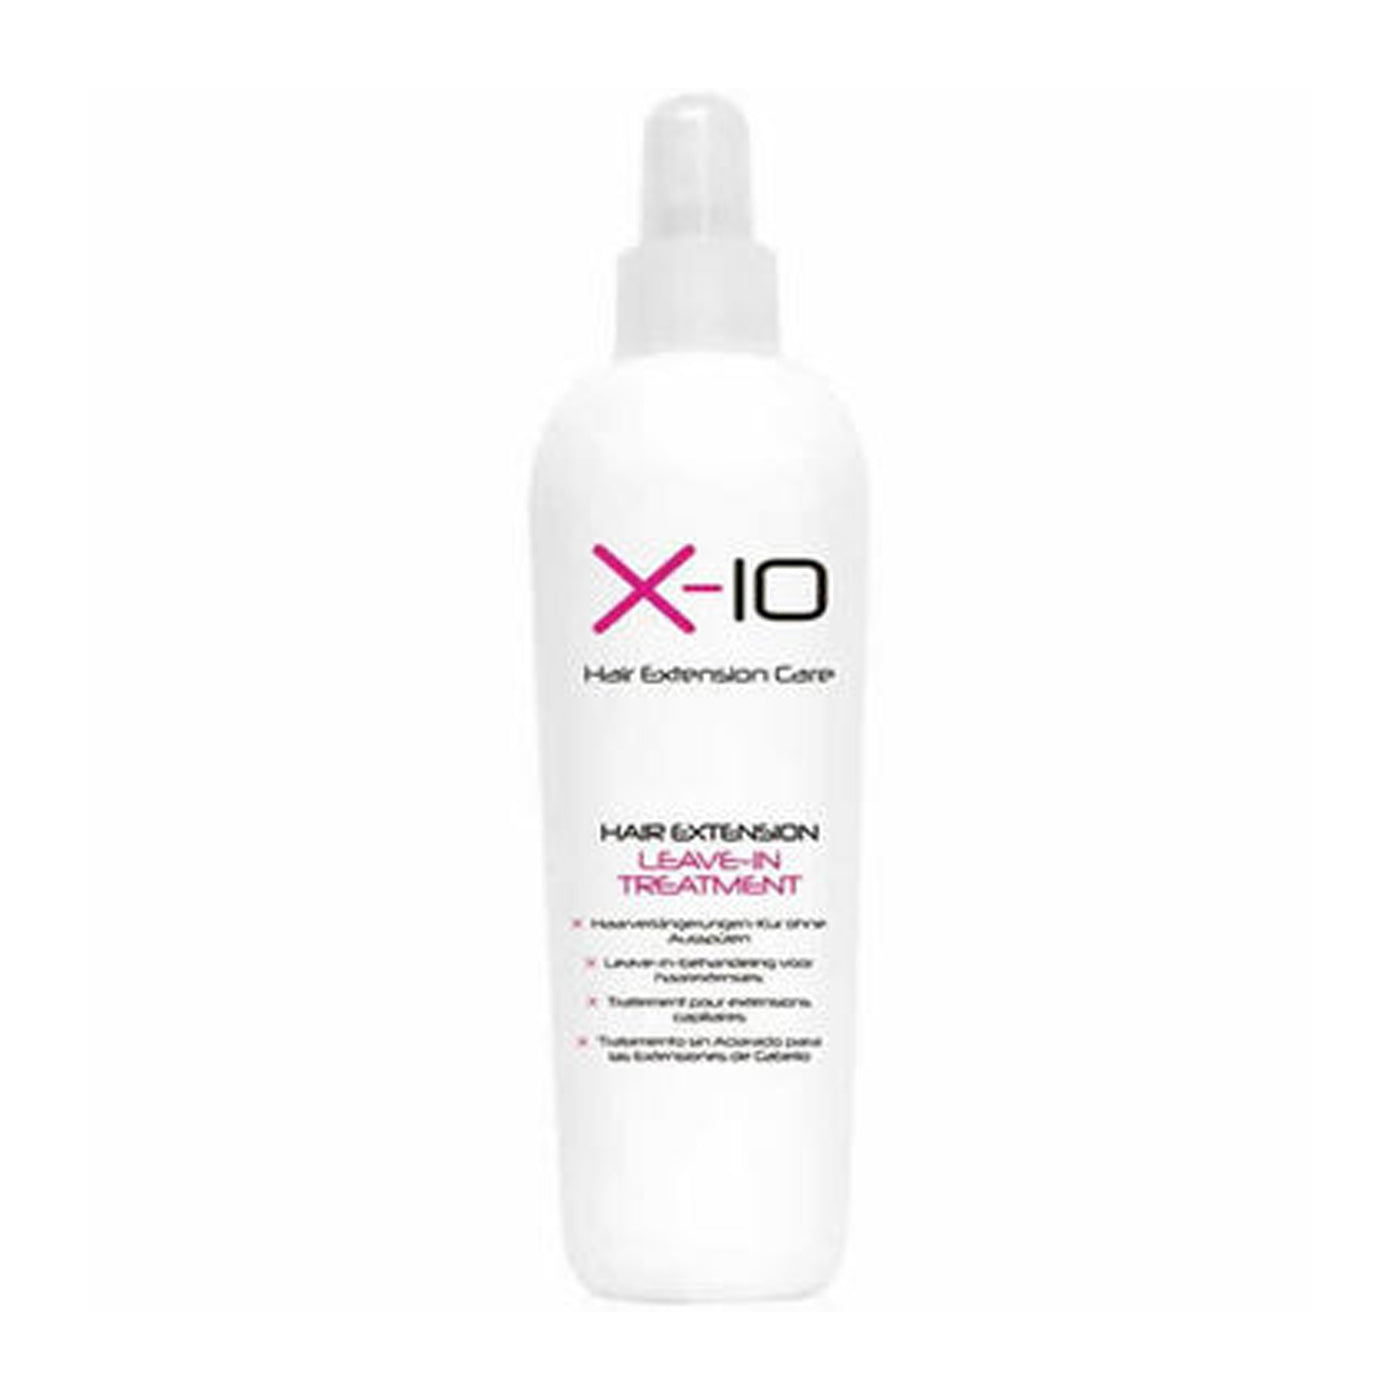 X-10 Hair Extension Care Leave-in Treatment (250ml) - Ultimate Hair and Beauty